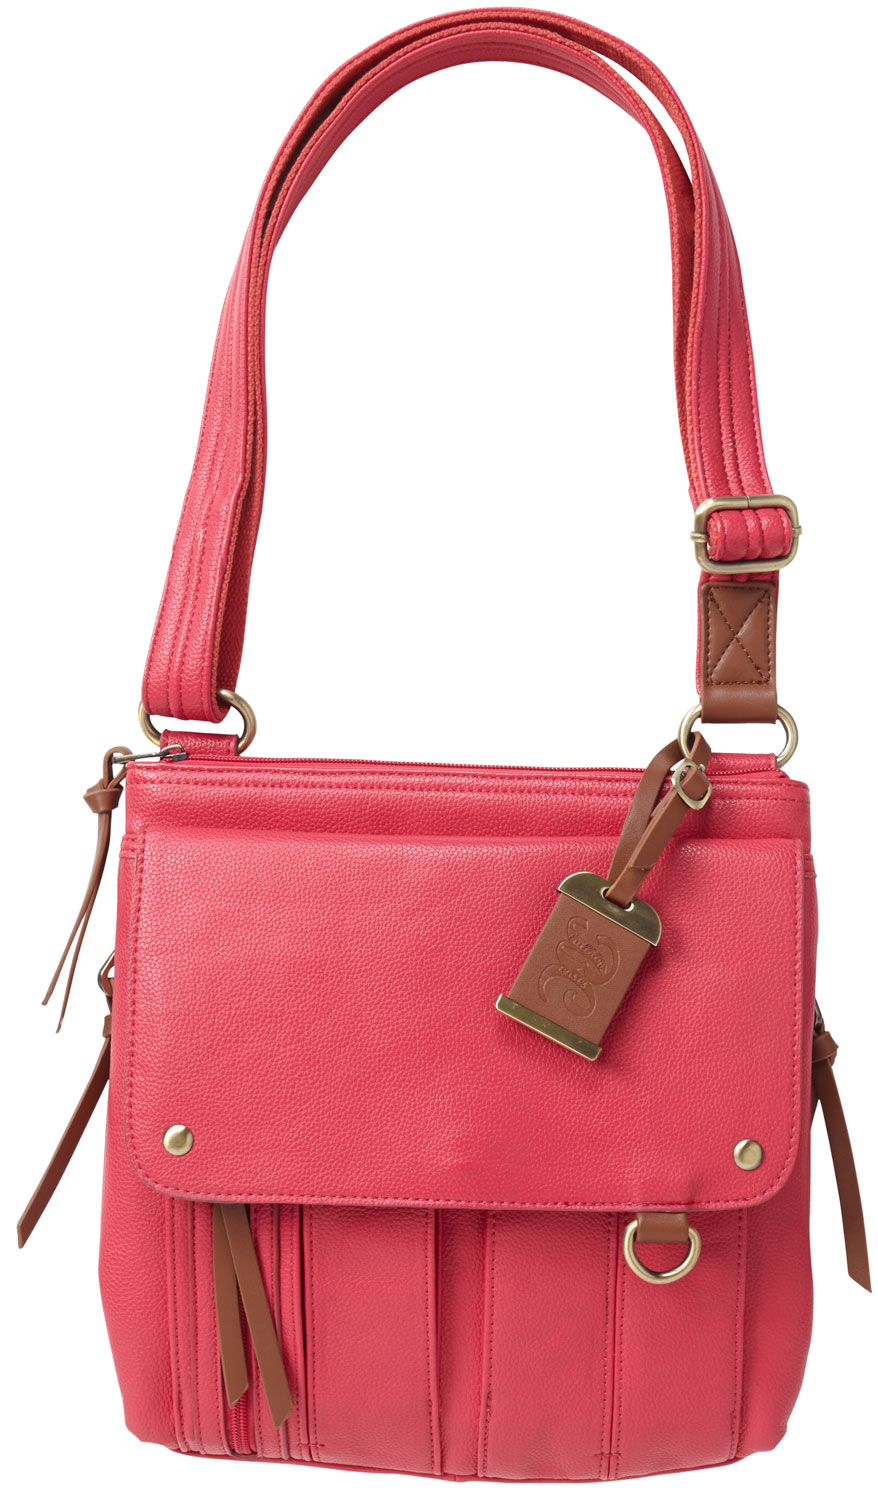 BULLDOG CONCEALED CARRY PURSE MED. CROSS BODY STYLE PINK<